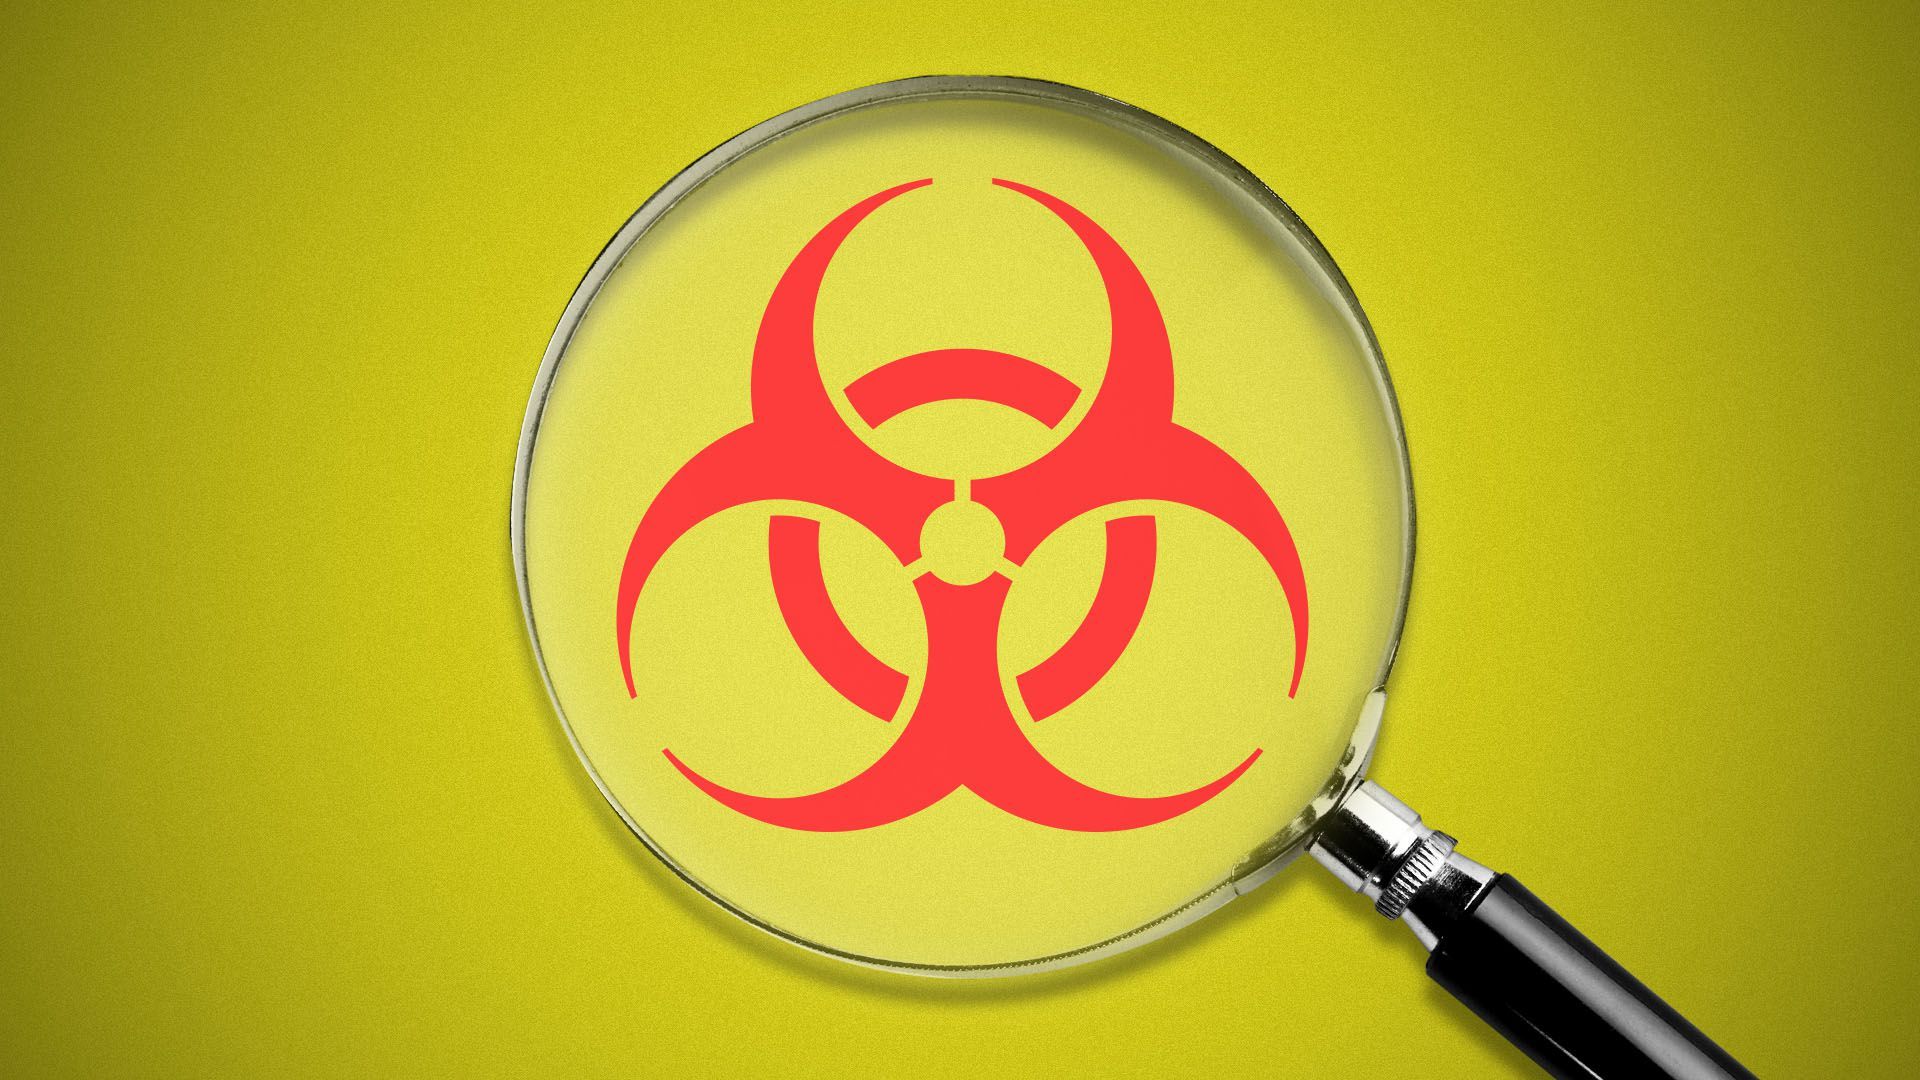 Illustration of a magnifying glass over a biohazard symbol.